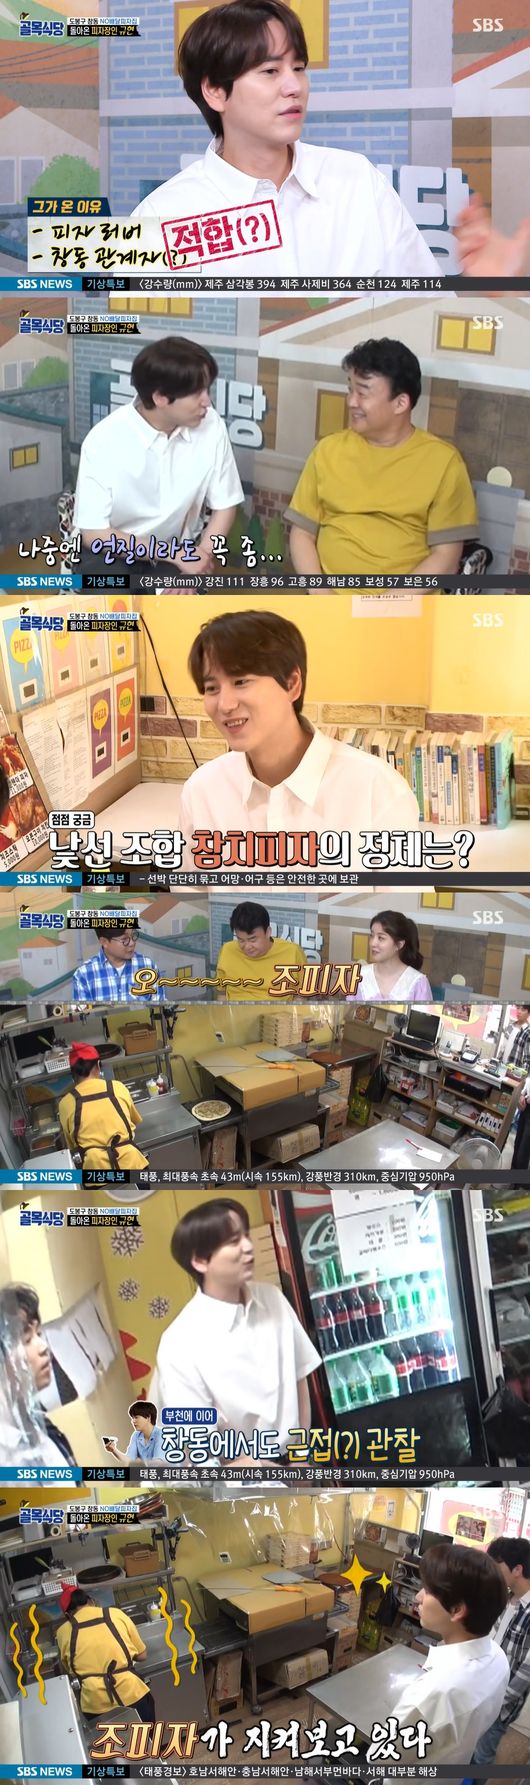 Lee Seung-gi and Cho Kyuhyun in The Alley Restaurant also played as relief pitchers to make Baek Jong-won happy.Dobong District Chang-dong alley was drawn at the SBS entertainment Baek Jong-wons The alley restaurant broadcasted on the 26th.On this day, Baek Jong-won visited the chicken gangjeong house while Dobong District Chang-dong alley was drawn.As soon as he entered, Baek Jong-won confirmed the Garlic in question and said, Do not use Garlic, because you smell sour Garlic pickles.I did not even look through the Garlic bag, it is a play and acting if I do not keep the basics, said Baek Jong-won, who emphasized that there is no meaning if I do not try to do it even if I have a chance of a lifetime.I was more strongly motivated by the hope that the novice bosses would solidify the basics.In addition to Garlic, he was the president of a chicken gang house, which he had a lot to supplement.Baek Jong-won told the chicken gangjeong house, If you prepare, I will send a difficult brother from this neighborhood.Next, a pizza restaurant with NO delivery was drawn. Cho Kyuhyun came back as a pizza maker in the situation room, and finally the pizza was completed and the tuna pizza was sampled first.Cho Kyuhyun said that toppings are new and I do not think it is a taste that is impressed. Then he heard the price and said, It is a good pizza.I do not feel the taste of red pepper oil, but I do not feel the taste, said Cho Kyuhyun, who added, I usually use red pepper oil a lot, and I do not feel more special because red pepper oil is in.Baek Jong-won and MCs also looked at it on the monitor, saying, There is a lot of toppings.Baek Jong-won called Cho Kyuhyun and said, I am looking at it accurately. In the appearance of magically finding the balance of taste with appropriate toppings, Baek Jong-won also expressed his pride that the balance of toppings and the harmony of toppings are important.Lee Seung-gi then appeared in surprise, and Baek Jong-won asked for feedback as he raised the flag of the two presidents who died.I asked for some advice and affectionate advice, and I arrived at the chicken gangjeong house and asked me carefully from the target audience.Lee Seung-gi, who was praised for I came to see the size and fry coating, relaxed the bosses; it made everyone admire with a genuine Maseong talk skill.Lee Seung-gi quickly turned the topic to the dead boss and continued the friendly atmosphere with the story of the neighborhood.Lee Seung-gis friendly consideration, the president, melted his heart, I boasted that our school had Lee Seung-gi, he naturally focused on cooking.Lee Seung-gi, the president who was relaxed because of Lee Seung-gi, decided to taste three different chicken gangsters with blind tests.Lee Seung-gi, who tasted carefully one by one, chose a sugar ratio higher than starch syrup, and the president, who was opposed, also listened.MCs who saw this said, I look at the typical student chairman style and a few opinions, he said, a steam leader who gently induces opinions to the right answer after collecting opinions.Lee Seung-gi said, I am honored to be able to develop together, once I accept the opinion of Mr. Baek Jong-won, make my own idea. He expressed his encouragement with a warm heart and heart like his senior and local brother.He delivered a 100,000 won cheering car and said, Buy more materials and practice more. He left a commemorative photo with Chang-dong Brothers.MCs who saw this said, I hope that warm encouragement will be completed with energy, and the food completion has been further improved by presenting specific opinions.The alley restaurant captures the broadcast screen